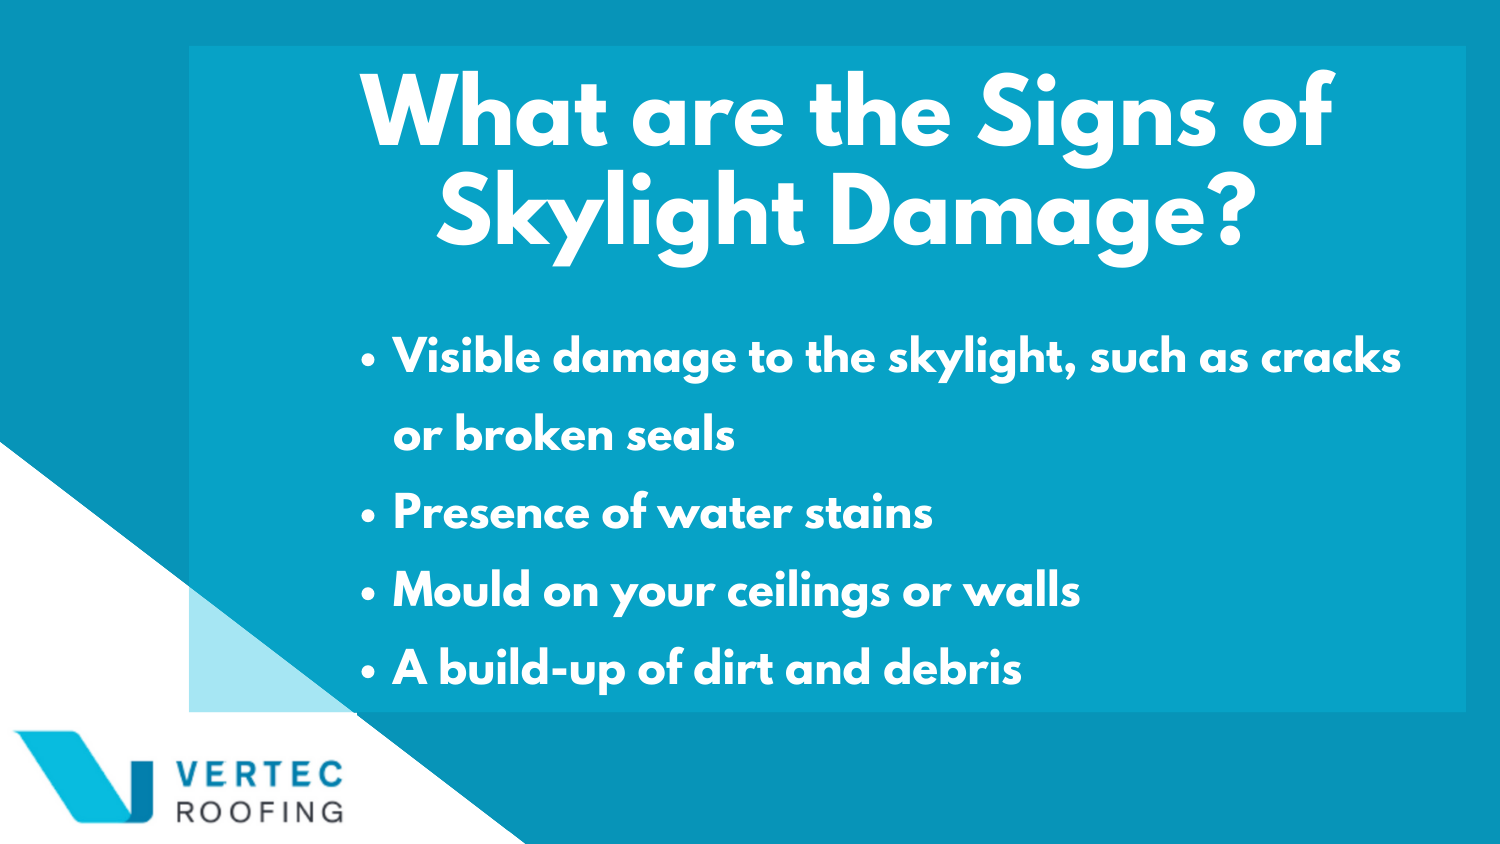 what are the signs of skylight damage?